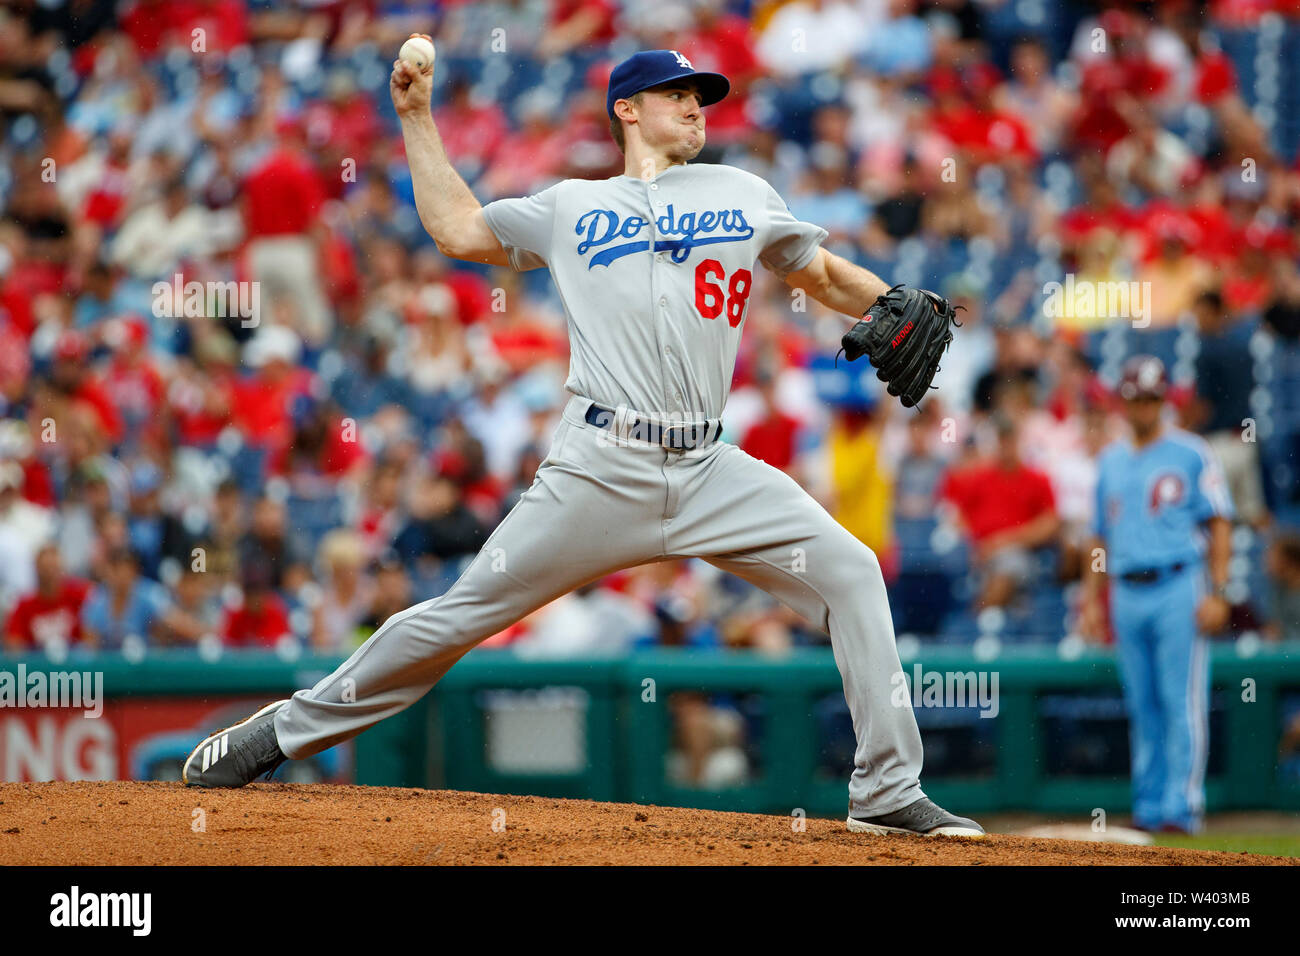 Philadelphia, Pennsylvania, USA. 18th July, 2019. Los Angeles Dodgers starting pitcher Ross Stripling (68) throws a pitch during the MLB game between the Los Angeles Dodgers and Philadelphia Phillies at Citizens Bank Park in Philadelphia, Pennsylvania. Christopher Szagola/CSM/Alamy Live News Stock Photo